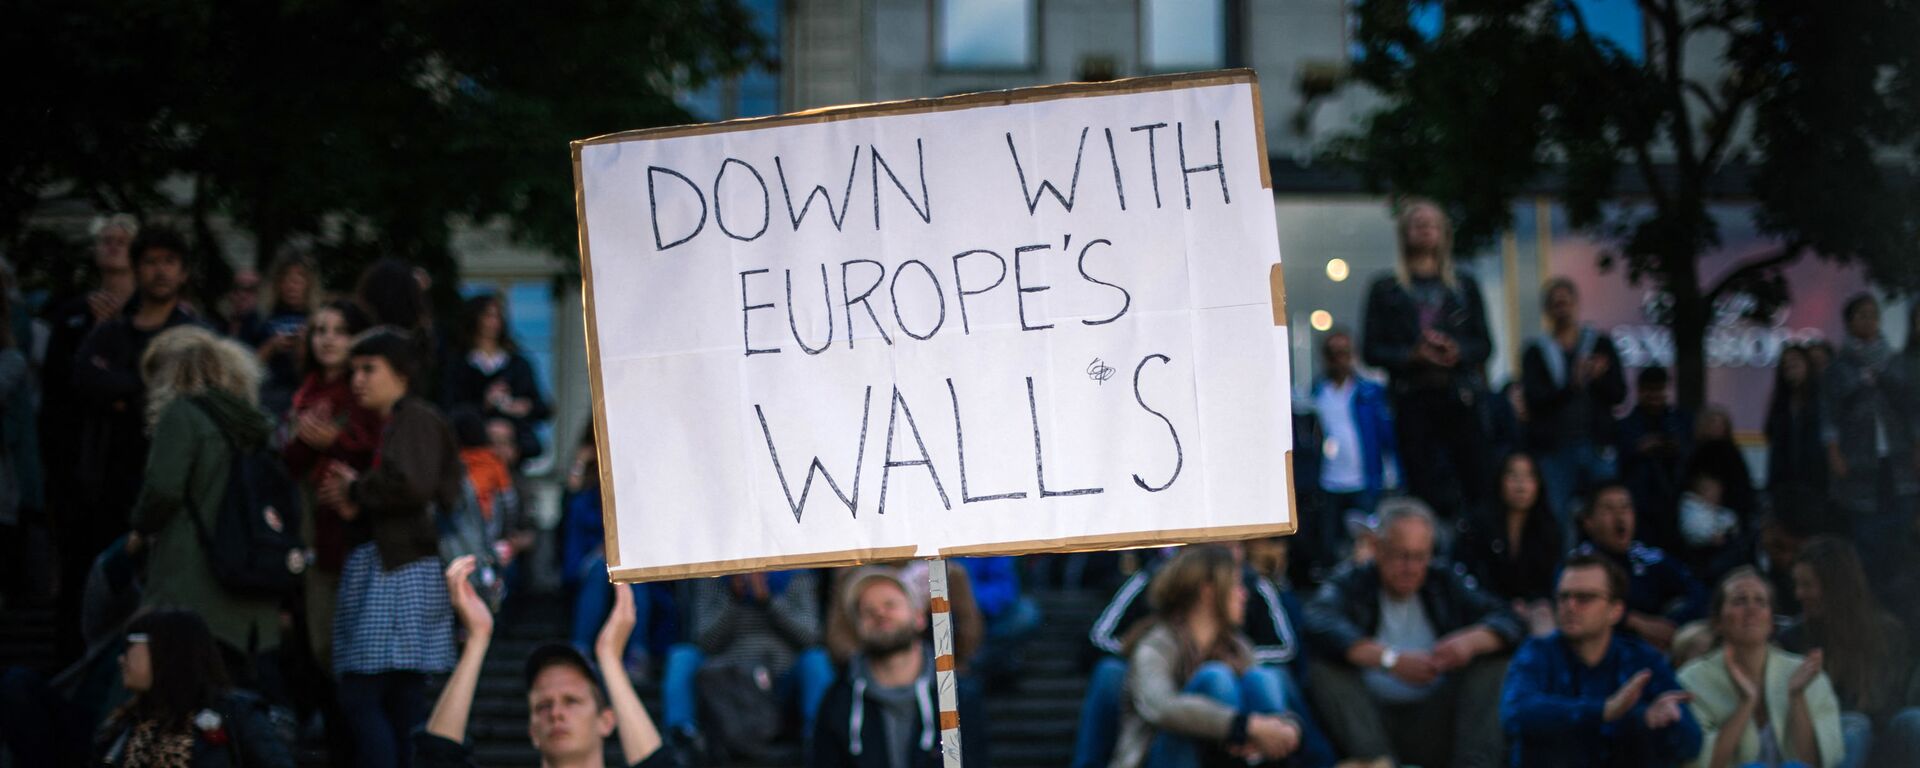 A man holds a sign as he takes part in a demonstration in solidarity with migrants seeking asylum in Europe after fleeing their home countries in Stockholm on September 12, 2015. - Sputnik International, 1920, 20.07.2021